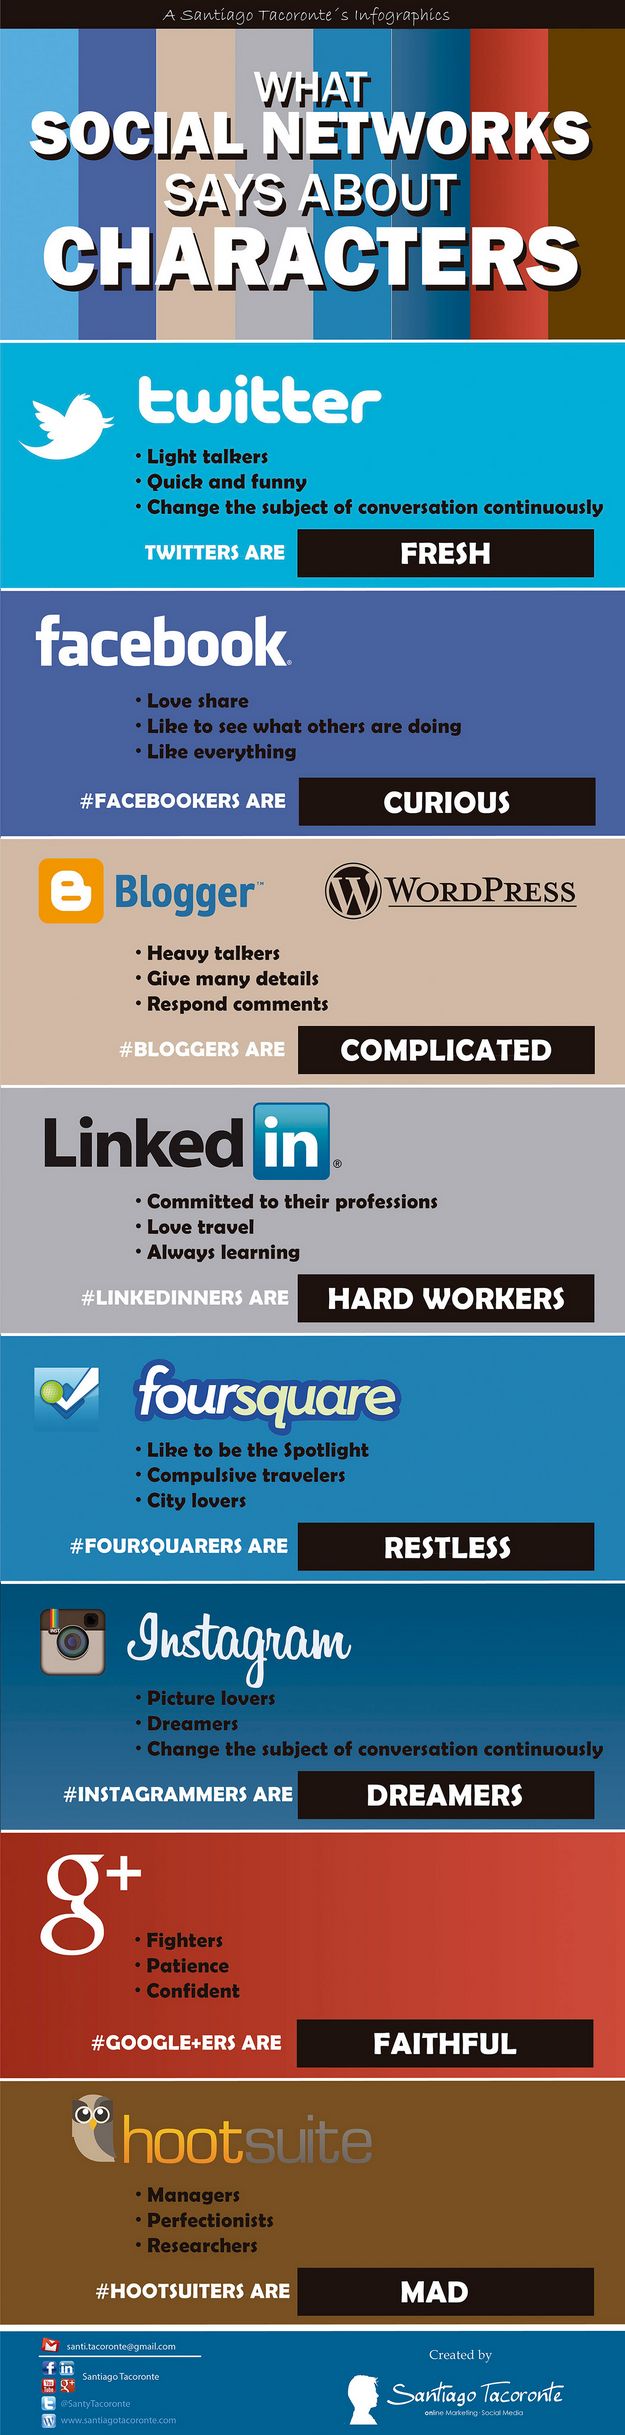 social-networks-characters